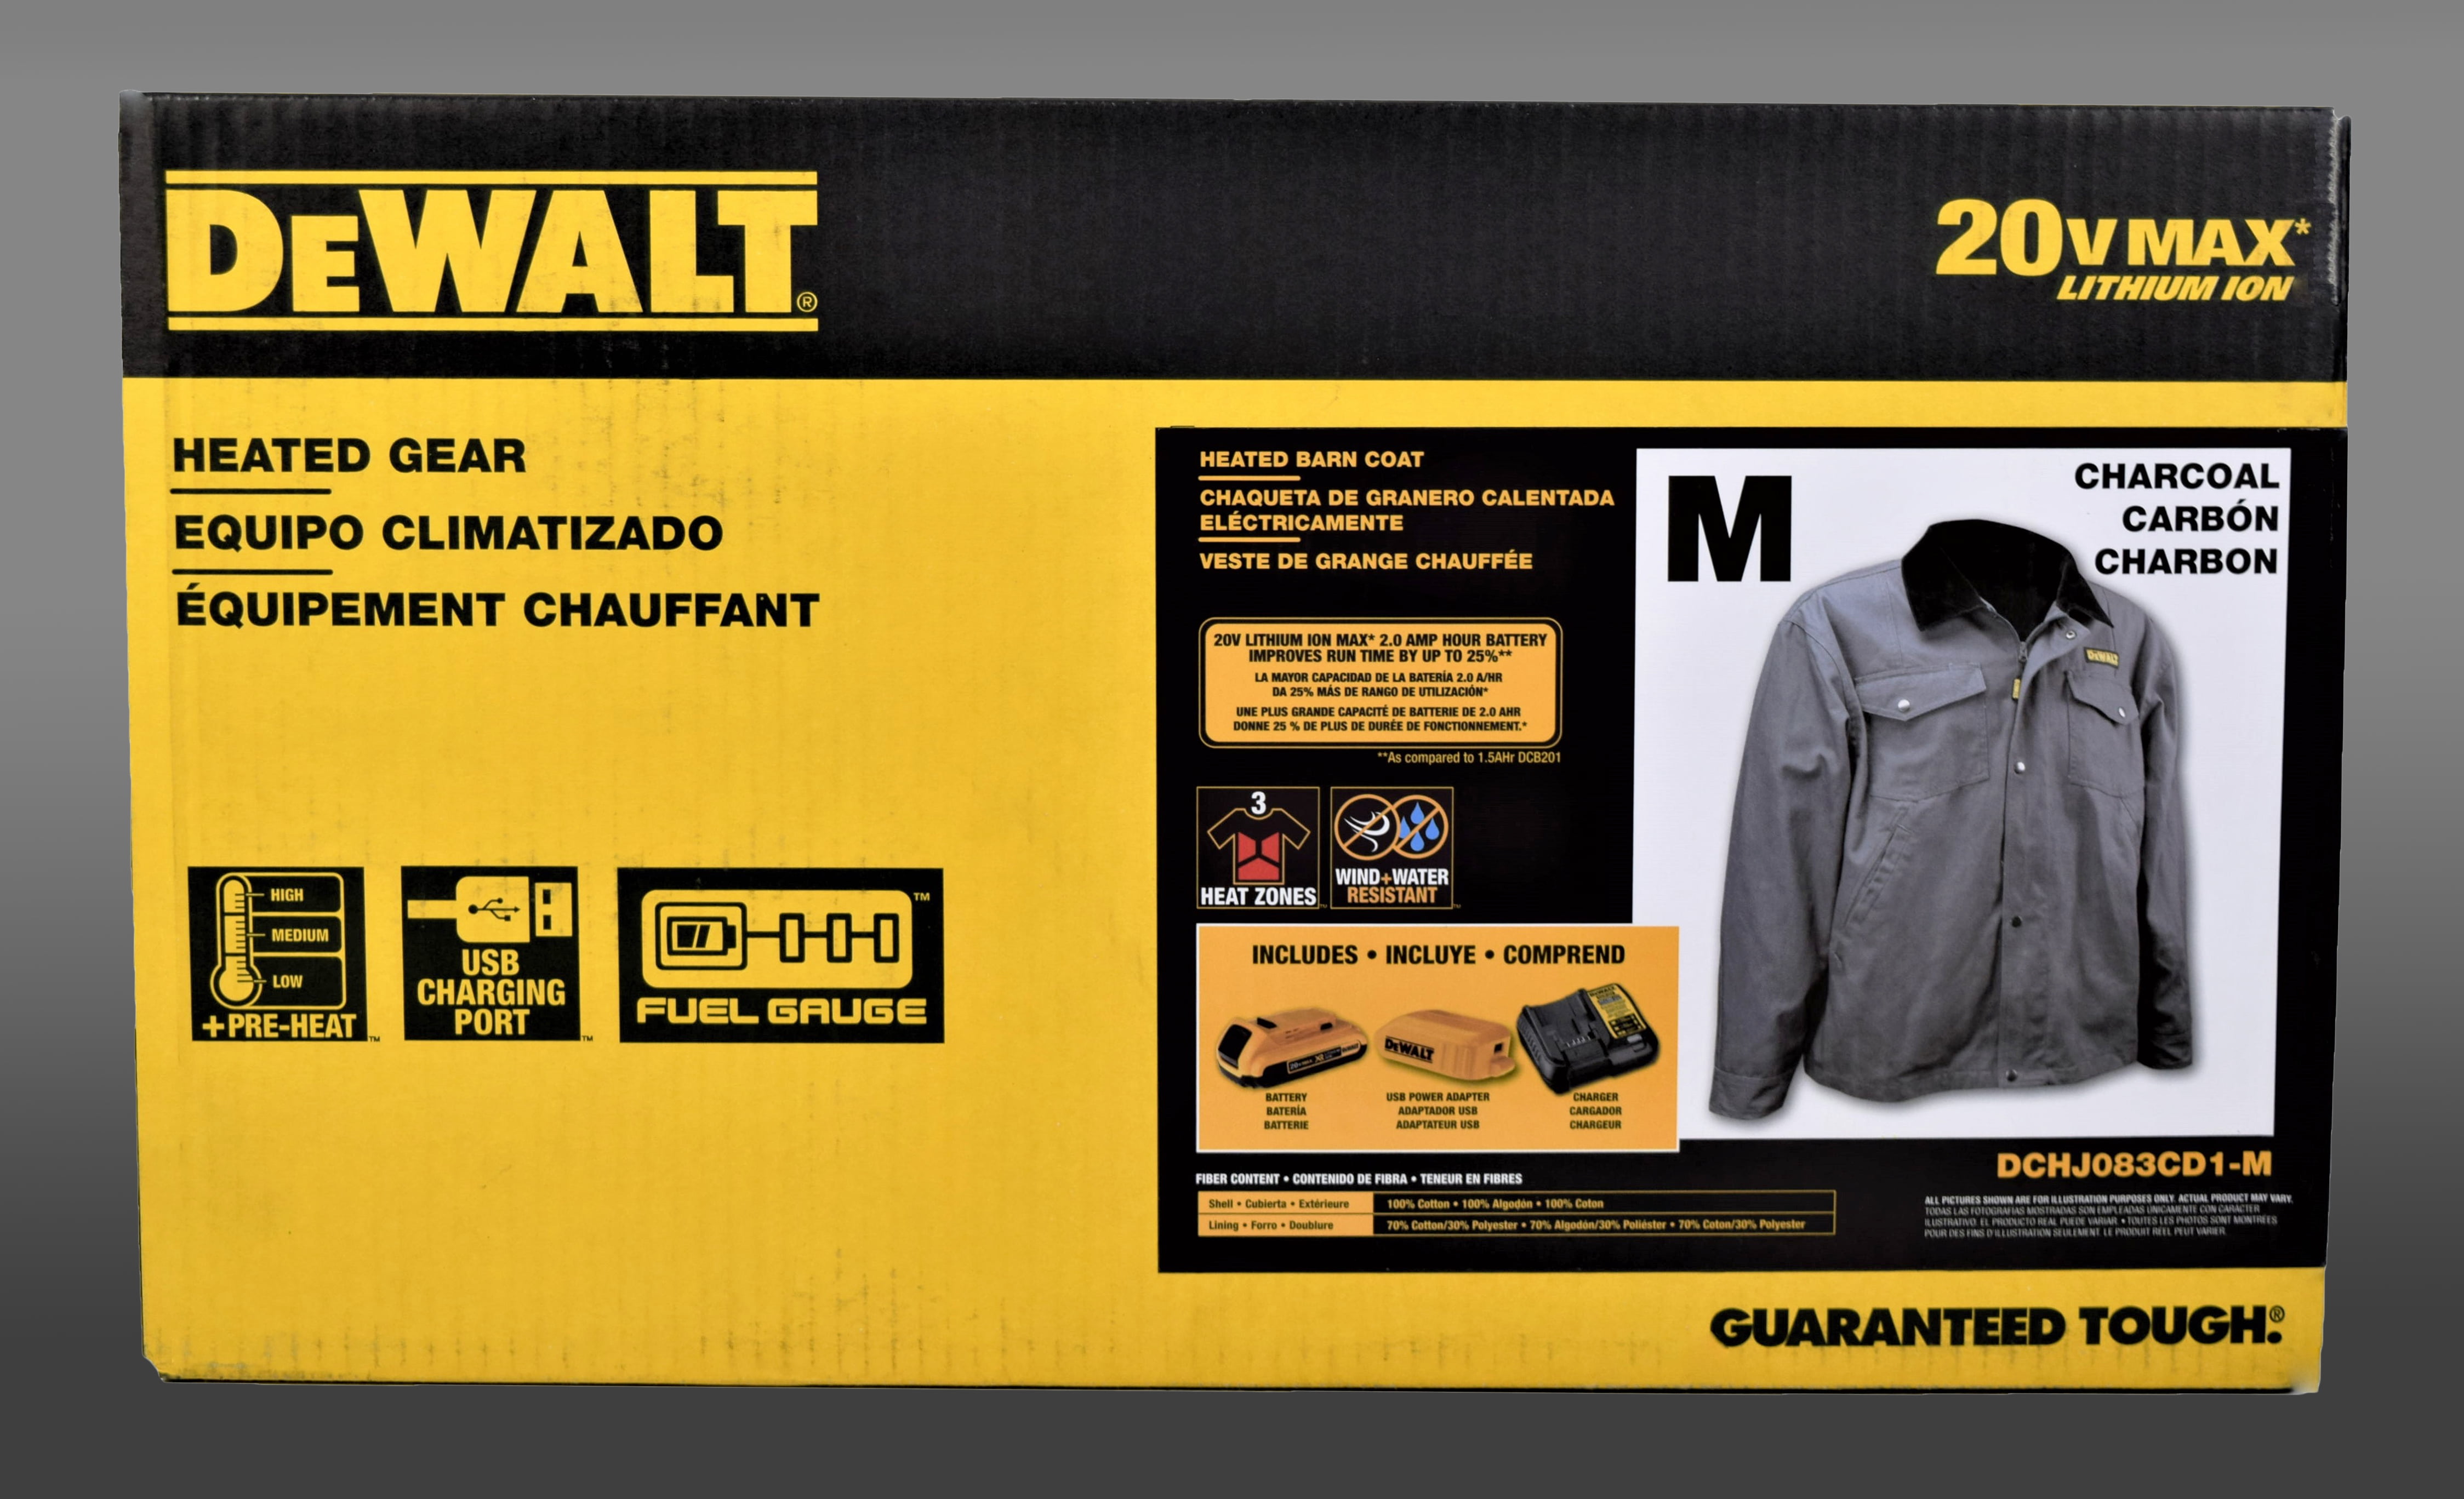 DEWALT DCHJ083CD1 Heated Barn Coat Kit with 2.0Ah Battery and Charger (M) 